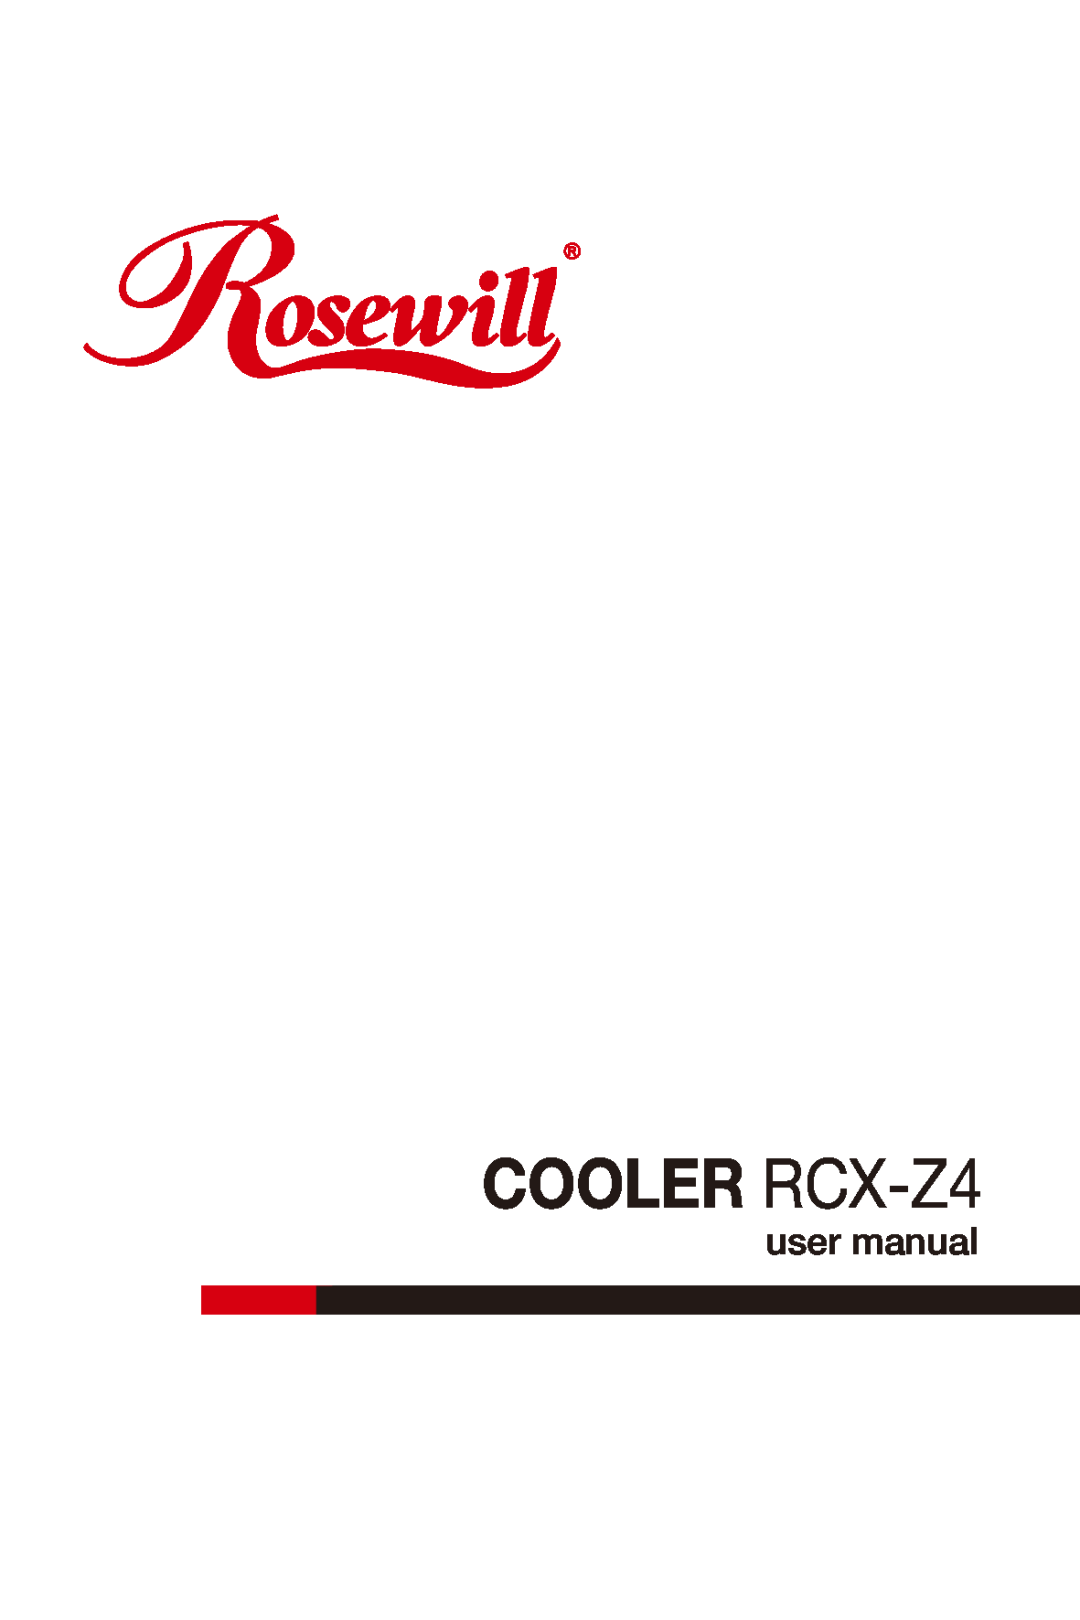 Rosewill user manual COOLER RCX-Z4 